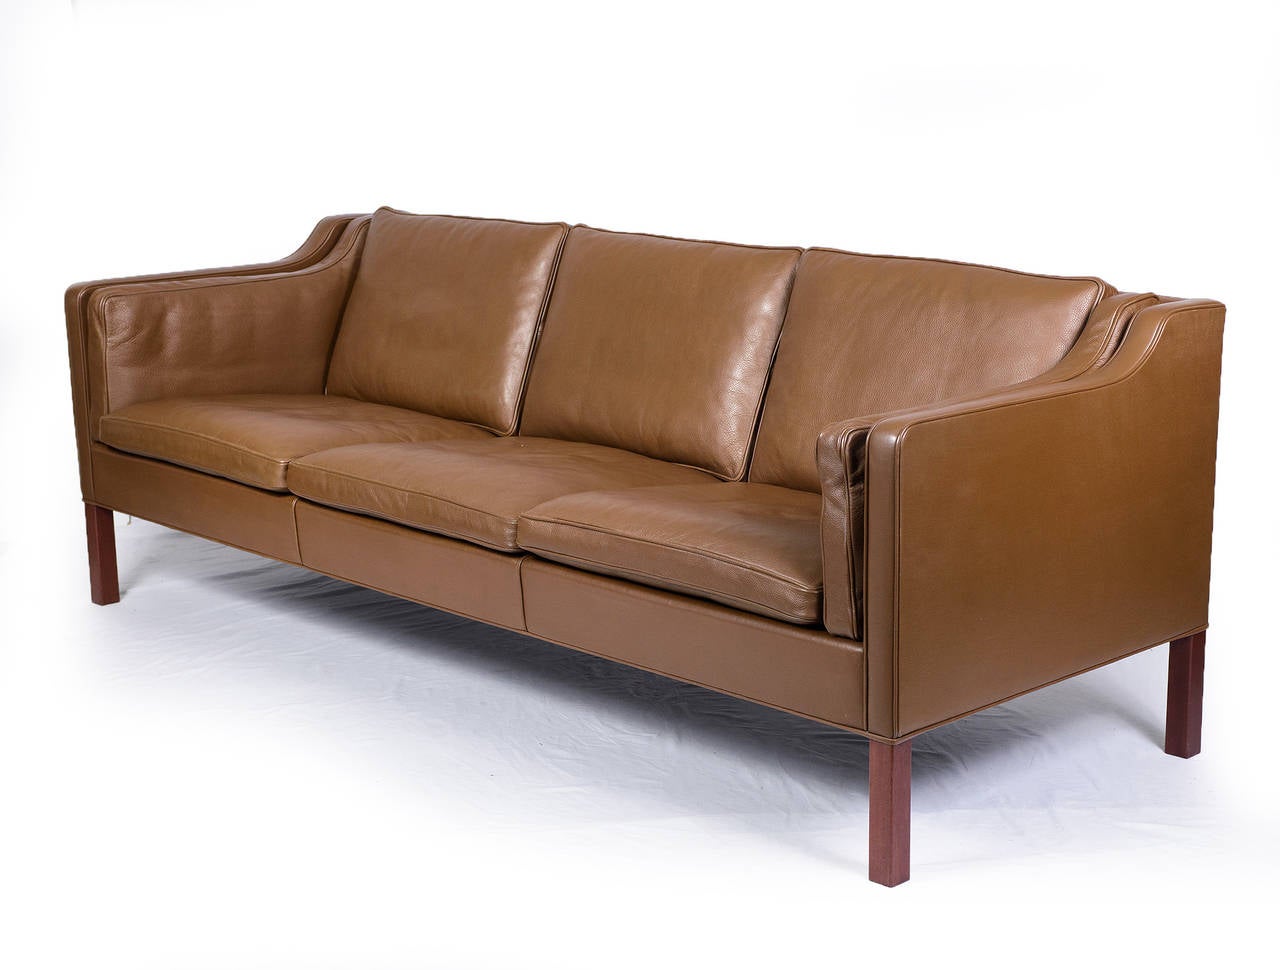 Borge Mogensen model #2213 three-seat leather sofa designed in 1962 and produced by Fredericia.   Store formerly known as ARTFUL DODGER INC